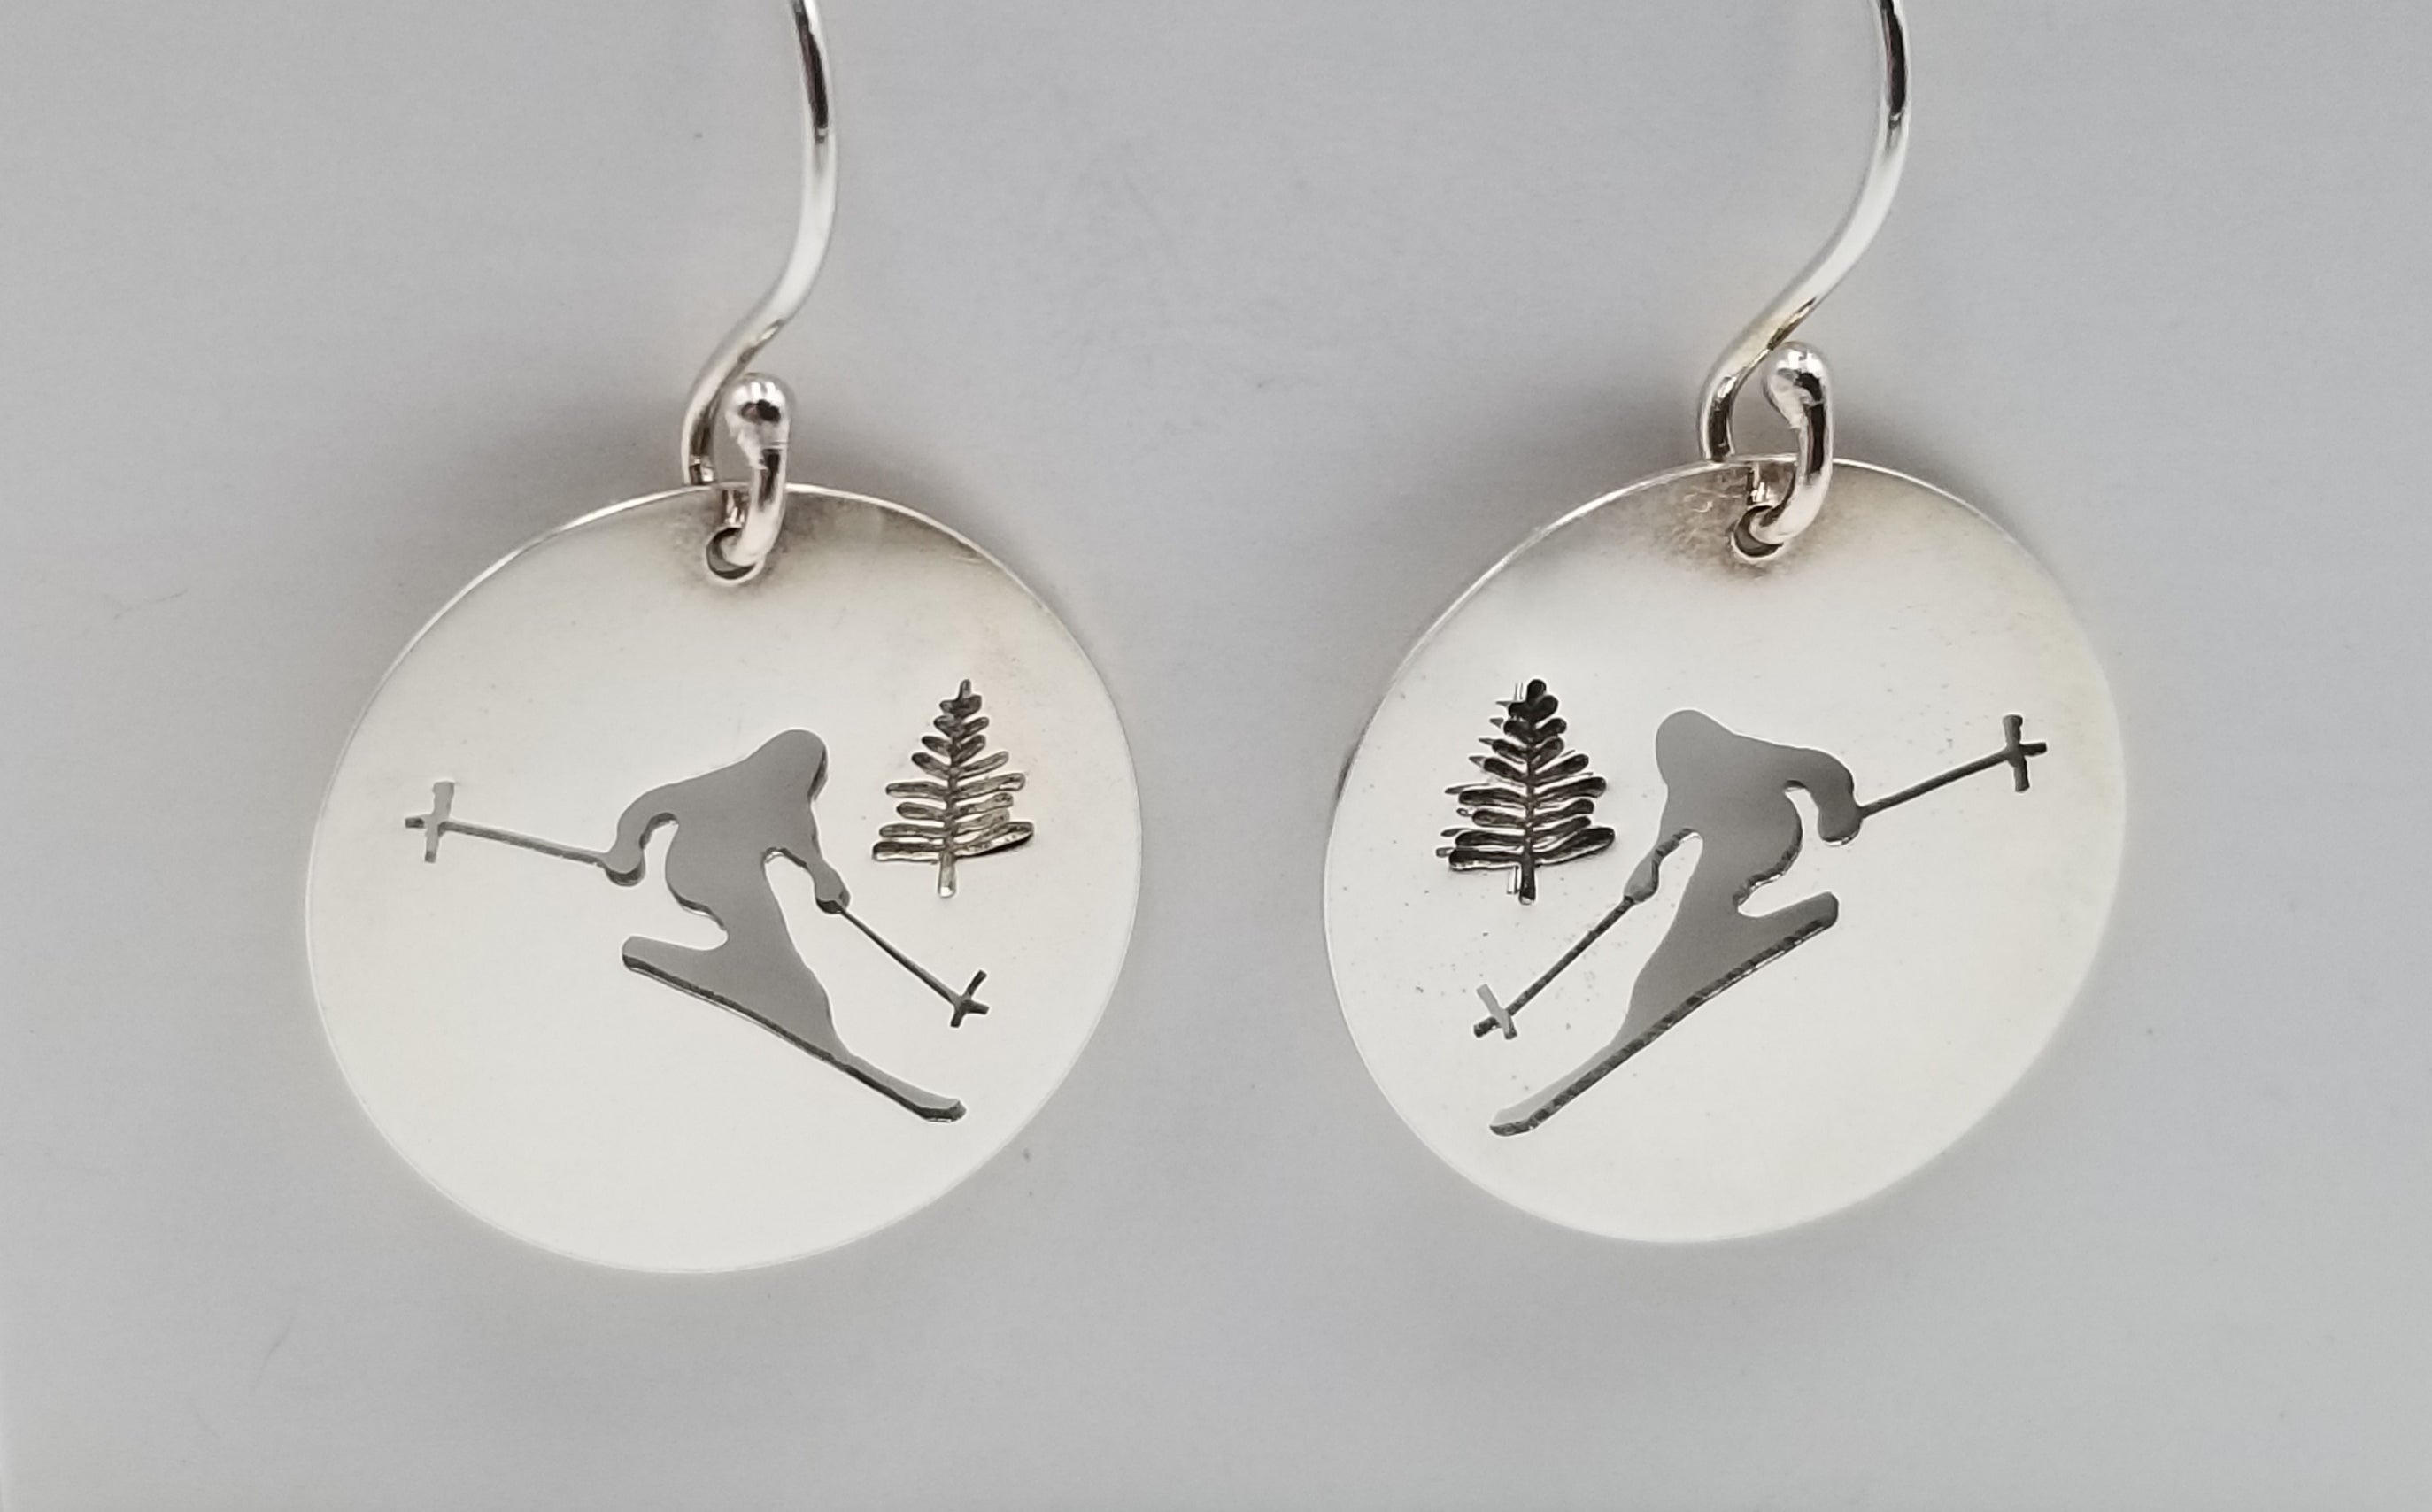 Skier jewelry SET sterling silver 3/4" dia earrings and 1" dia pendant handsawn necklace holiday gift ski lover winter jewelry Free shipping and gift box